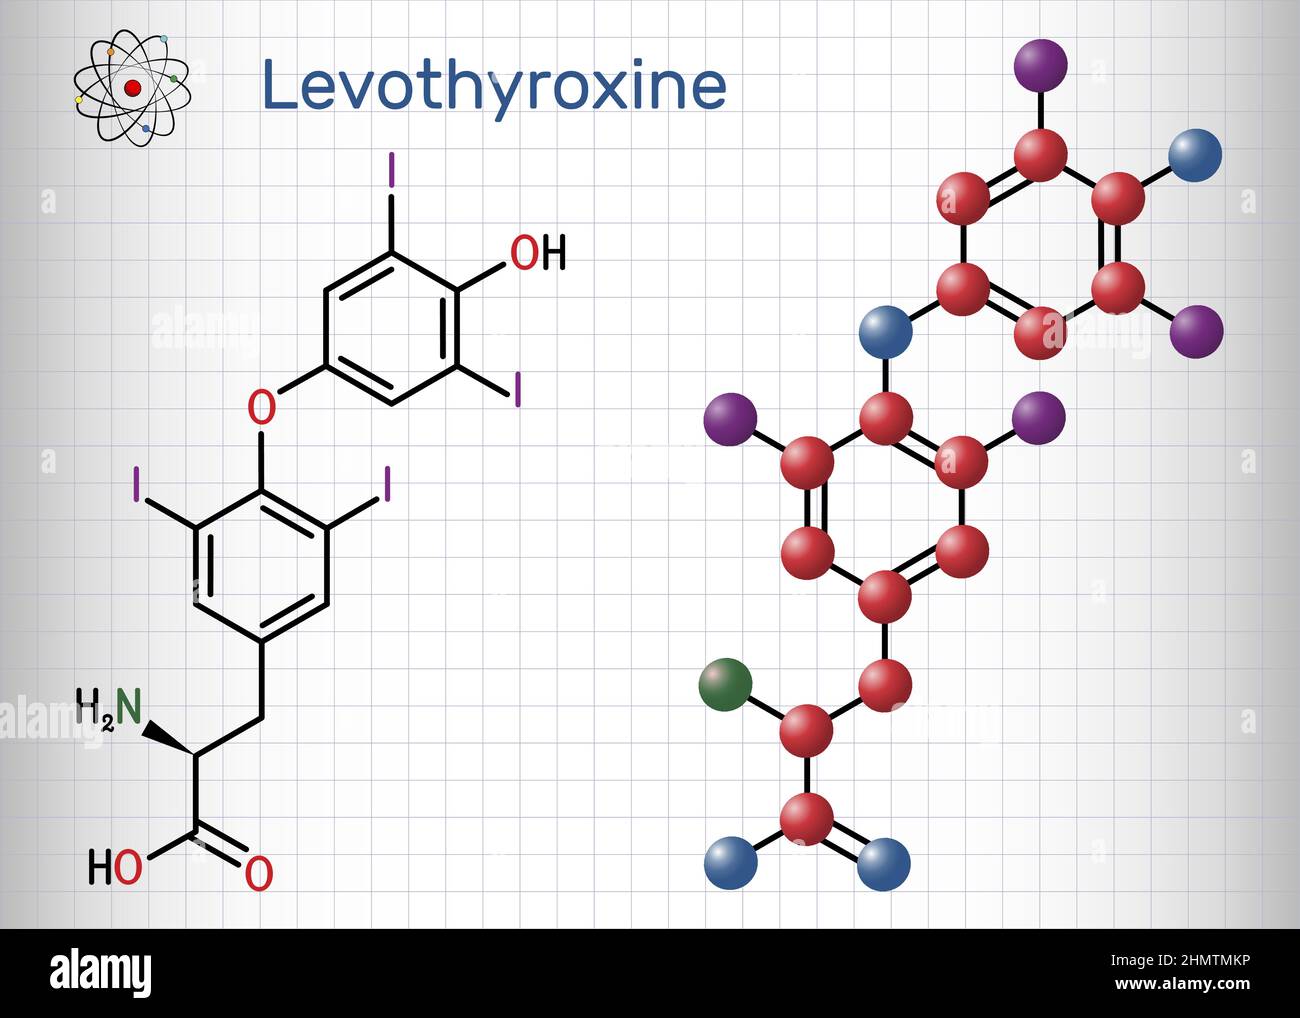 Levothyroxine, L-thyroxine molecule. It is synthetic form of the thyroid hormone thyroxine, T4 hormone, used to treat hypothyroidism. Structural chemi Stock Vector